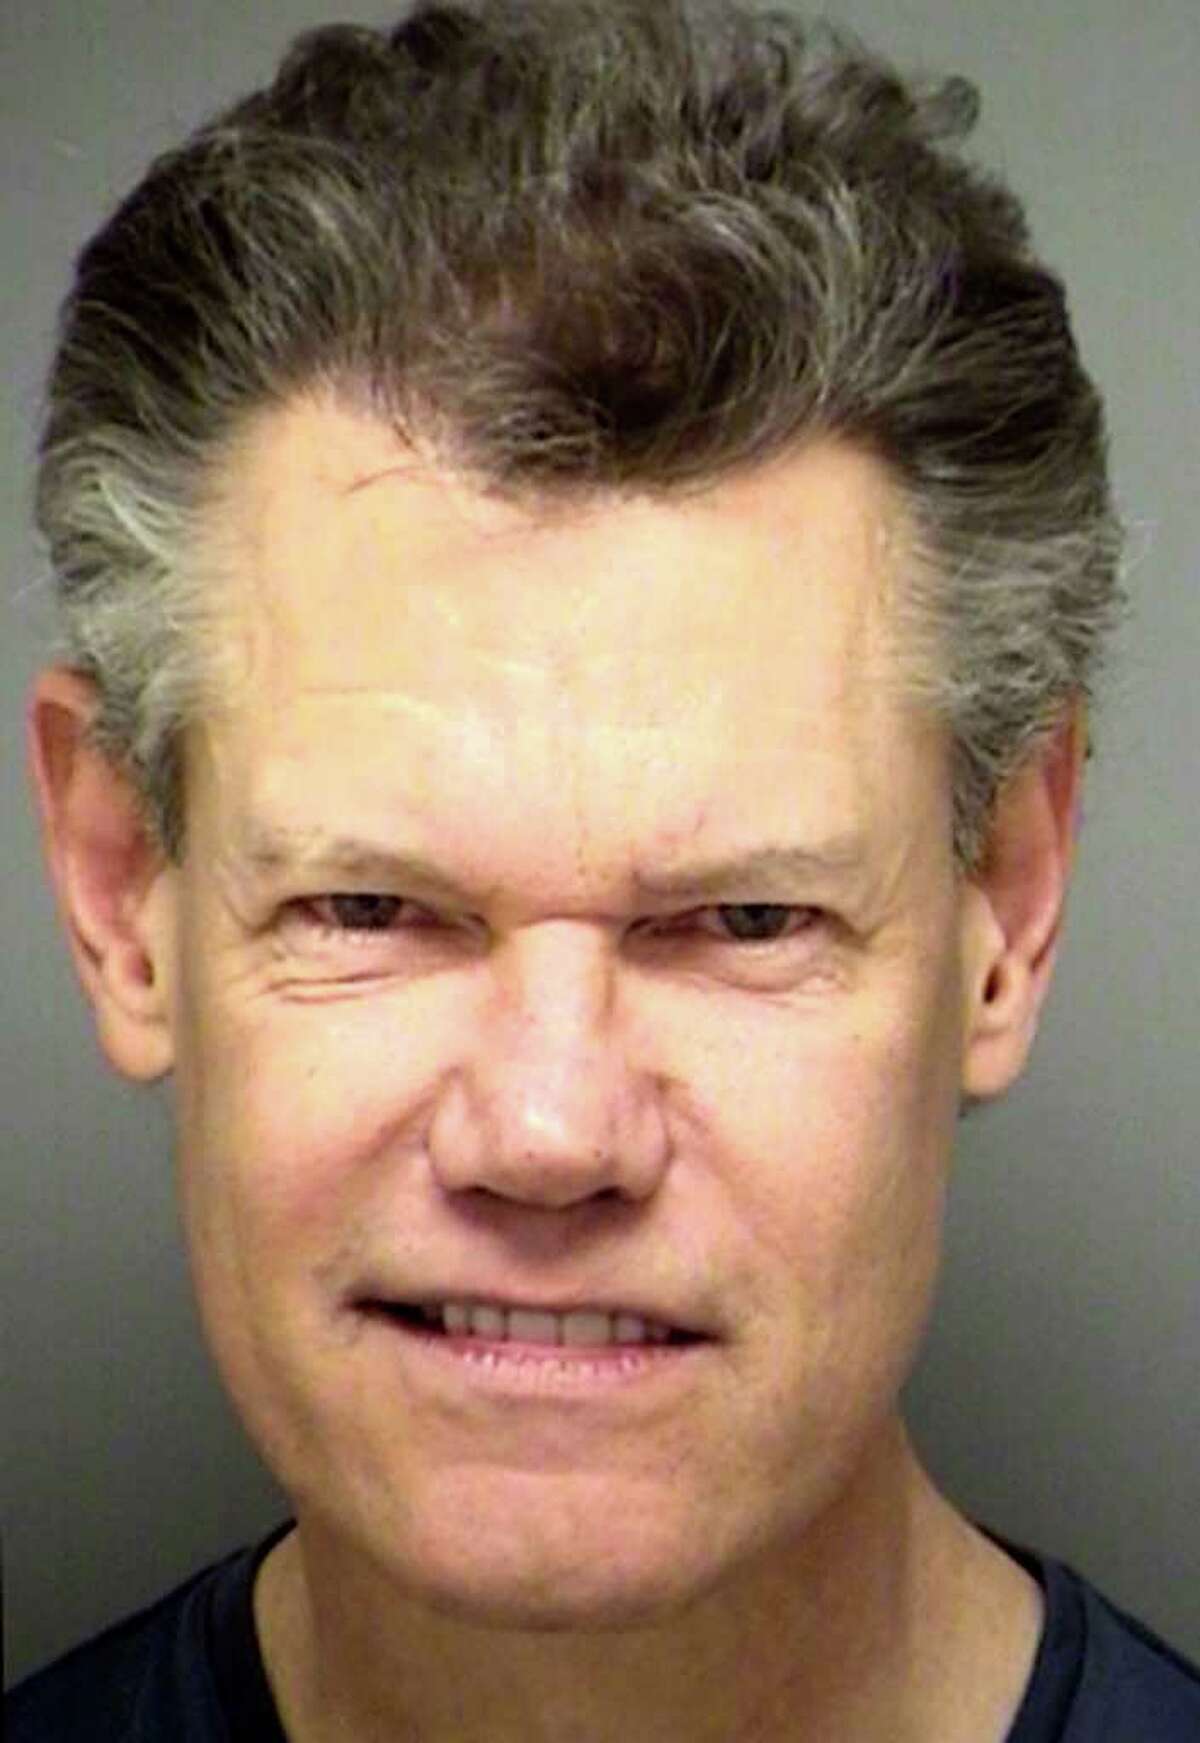 This Feb. 6, 2012 booking photo provided by the Denton County Sheriff's Department in Texas, shows country music star Randy Travis. Travis was arrested in Sanger, Texas, on Monday, Feb. 6, 2012, on a charge of public intoxication.